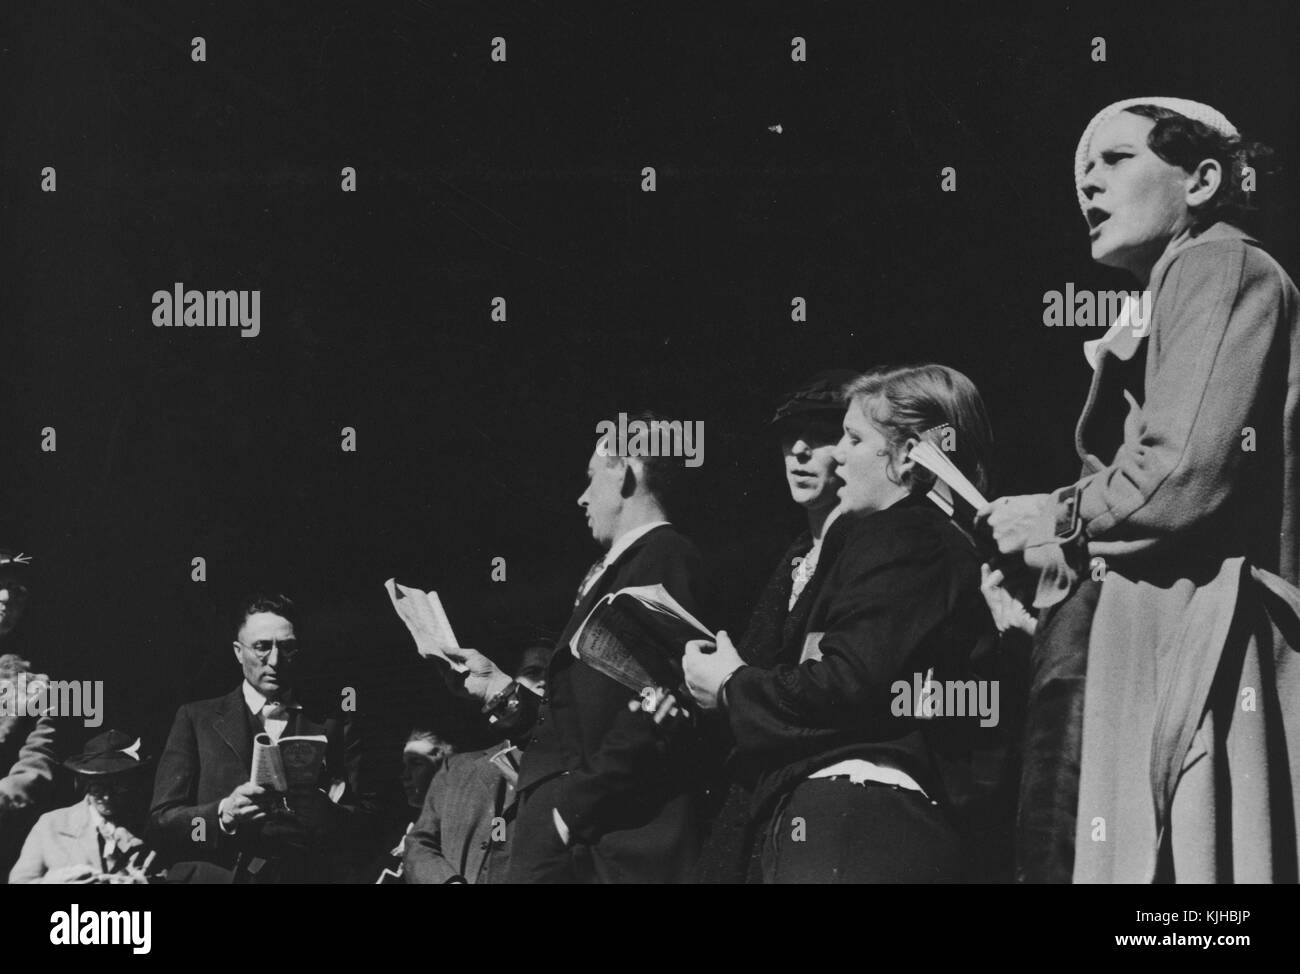 A photograph of a group of men and women are gathered together as part of a religious meeting, they are holding hymnals and singing hymns towards an audience that is not shown, Nashville, Tennessee, 1935. From the New York Public Library. Stock Photo